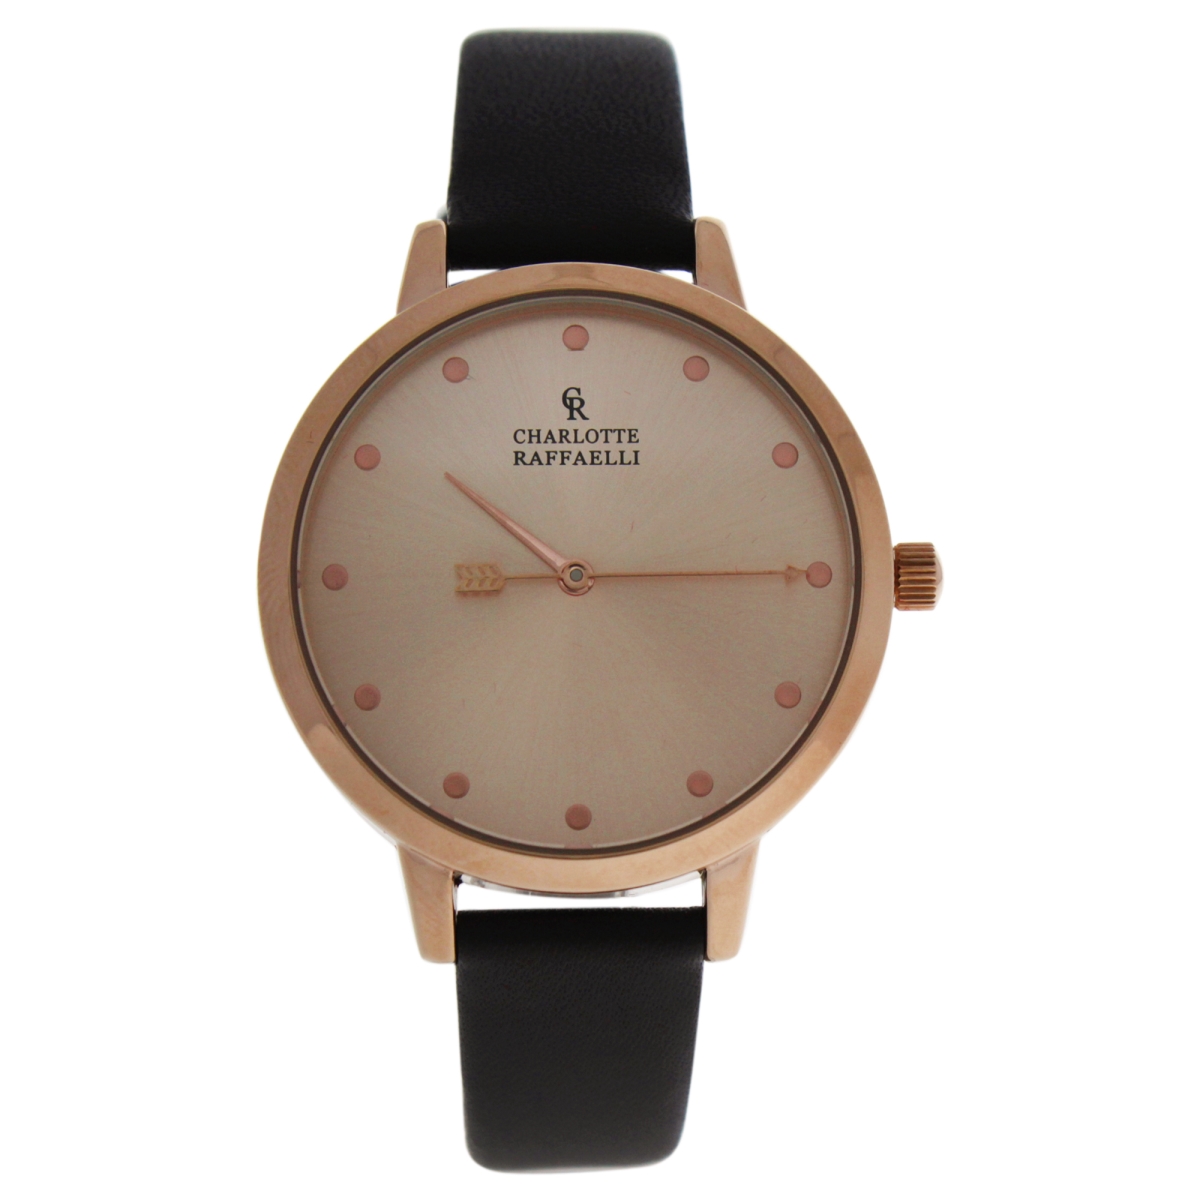 W-wat-1509 La Basic - Rose Gold & Brown Leather Strap Watch For Women - Crb006